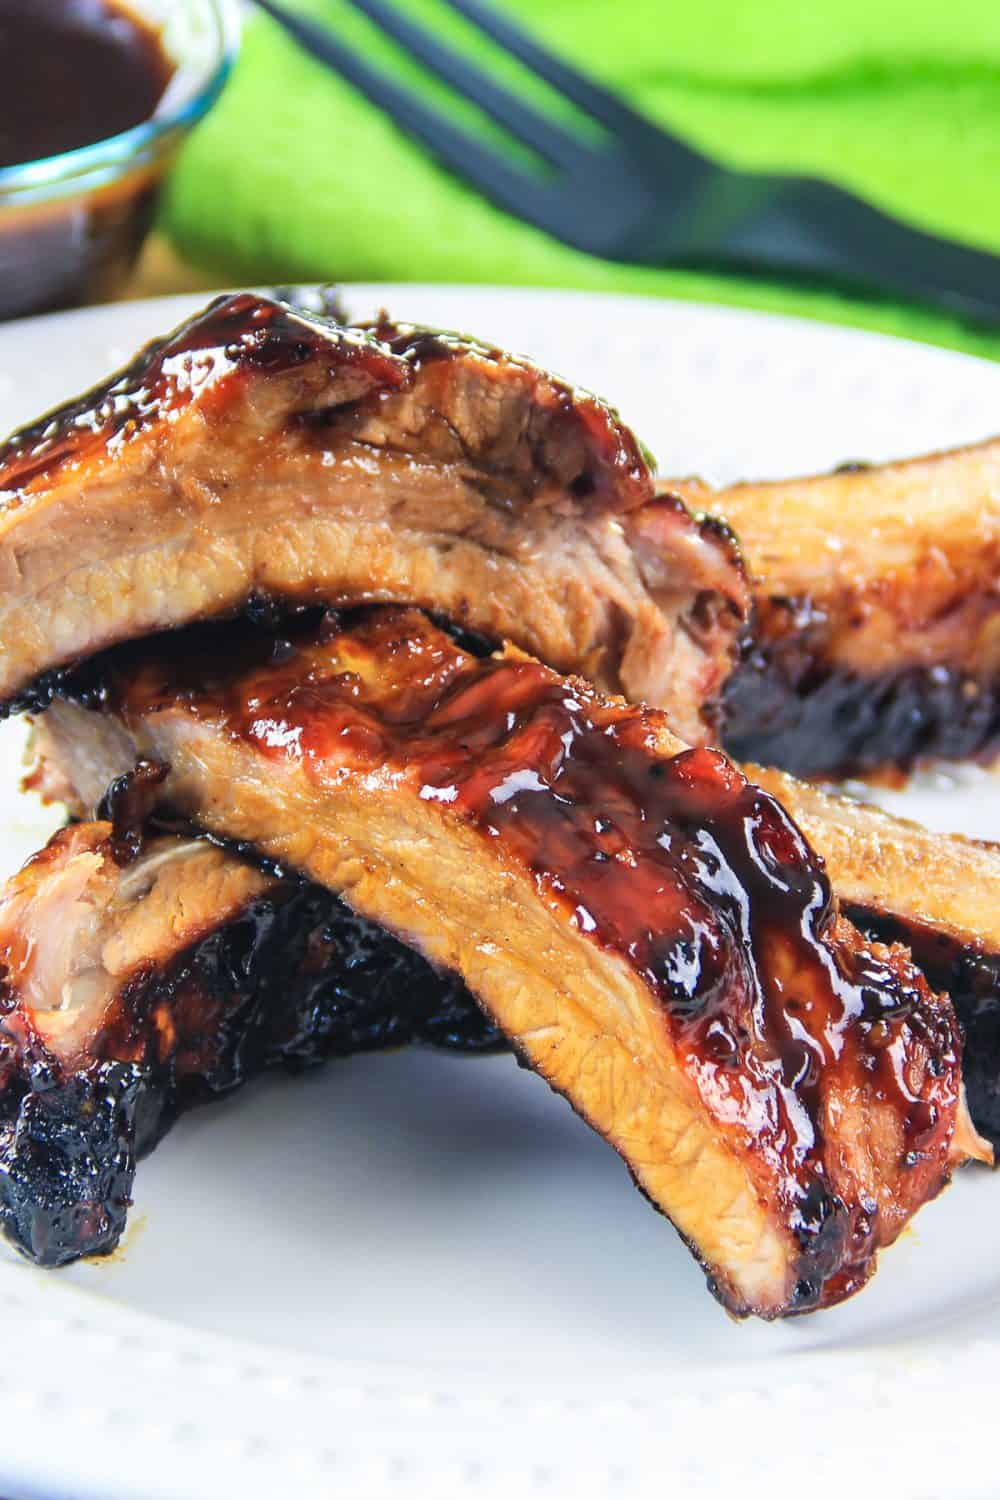 Barbecue Pork Ribs Simply Home Cooked,Moroccan Mint Tea Set